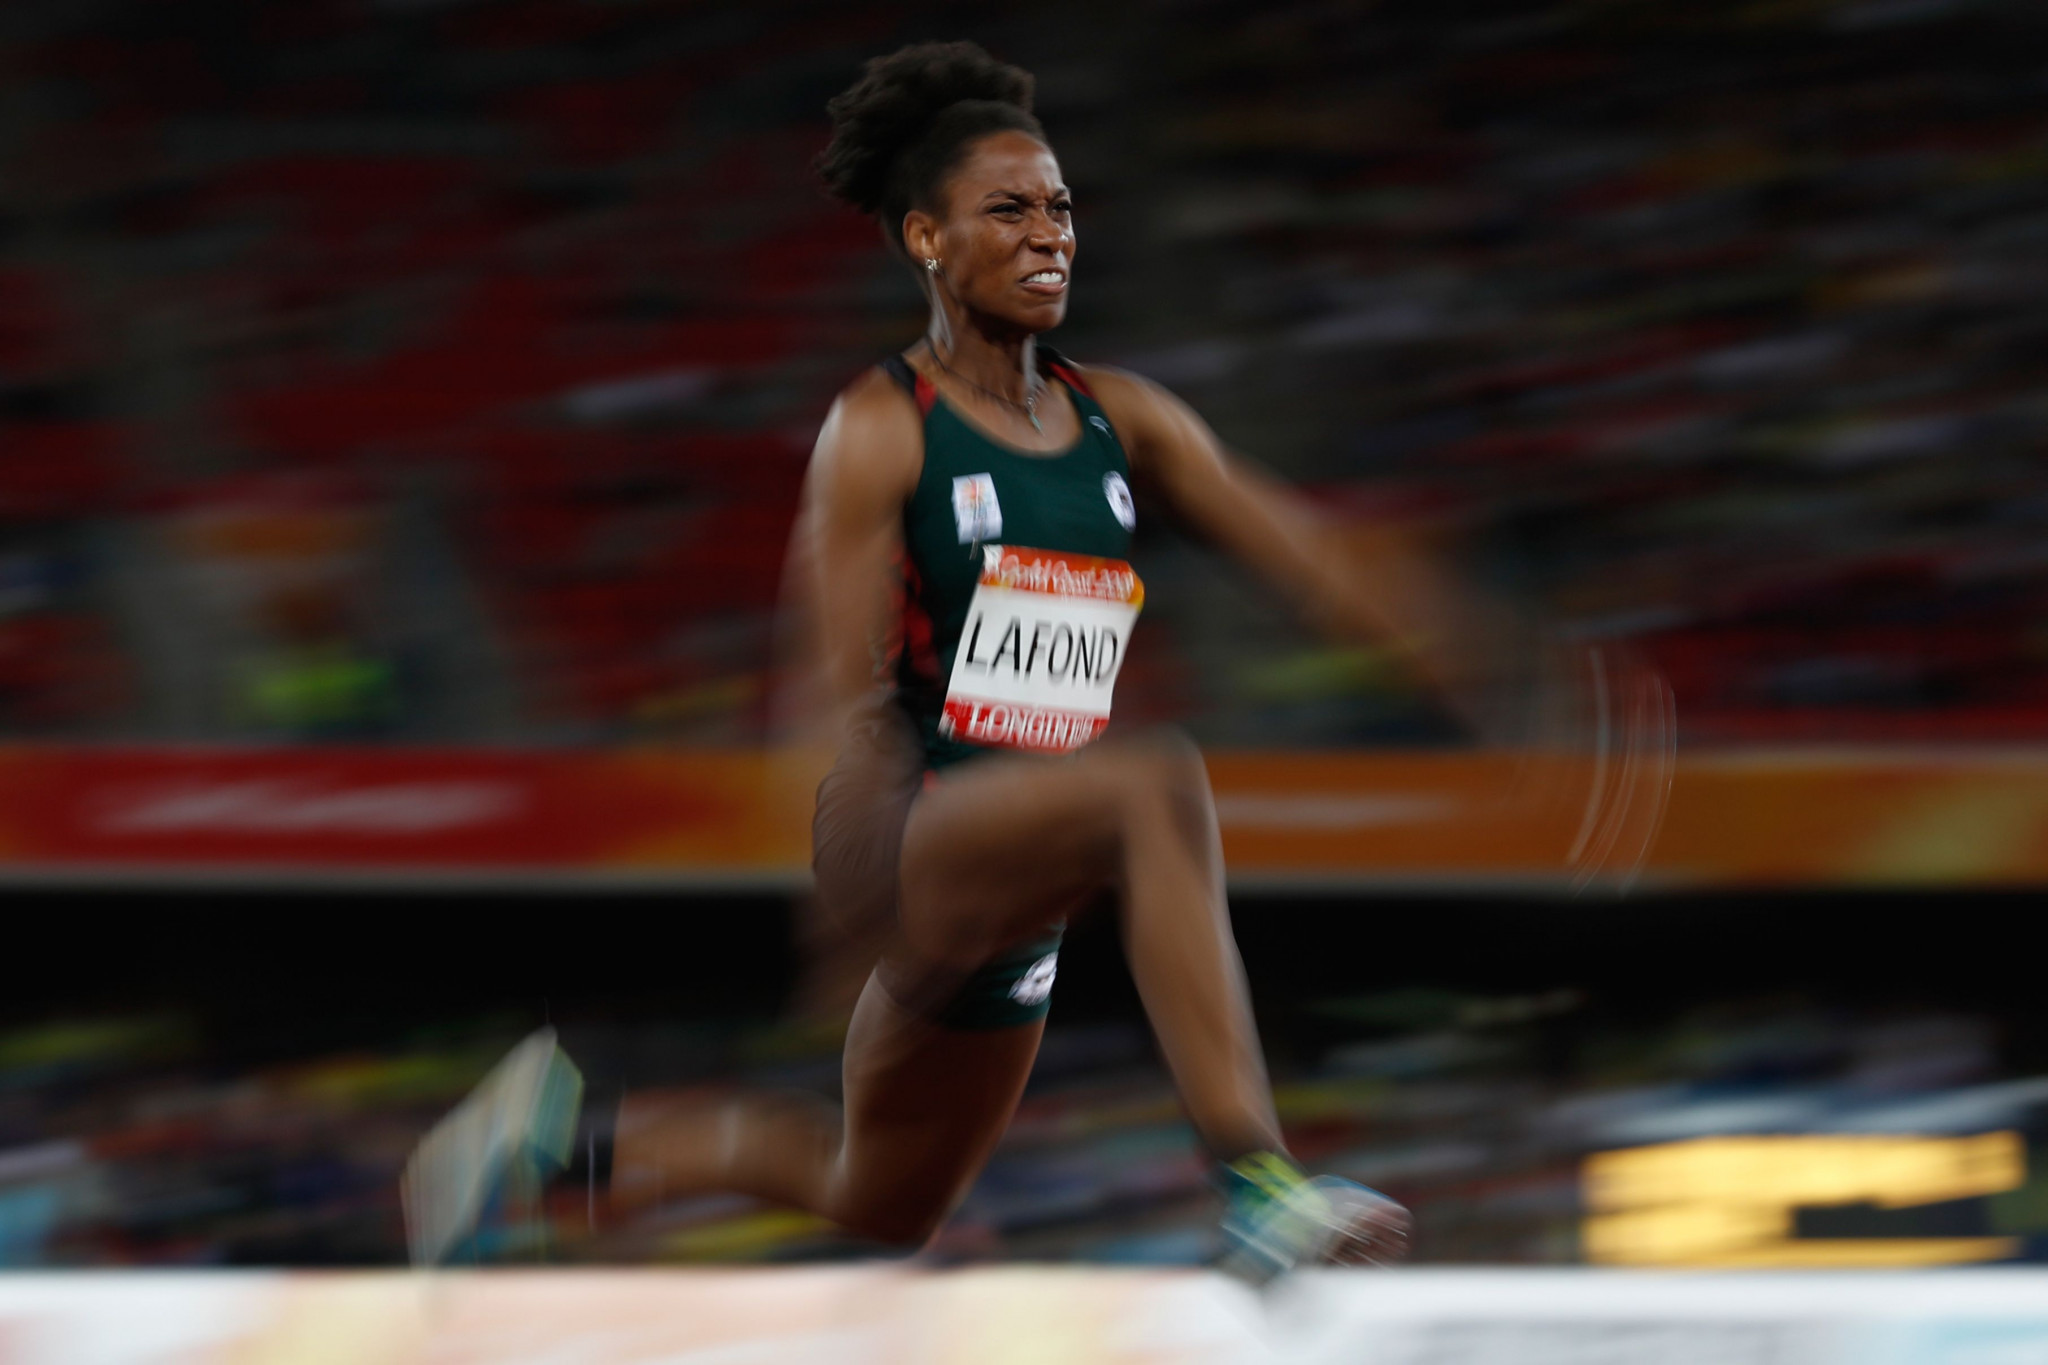 Thea Lafond won triple jump bronze for Dominica at Gold Coast 2018, where the country won its first Commonwealth Games medals ©Getty Images